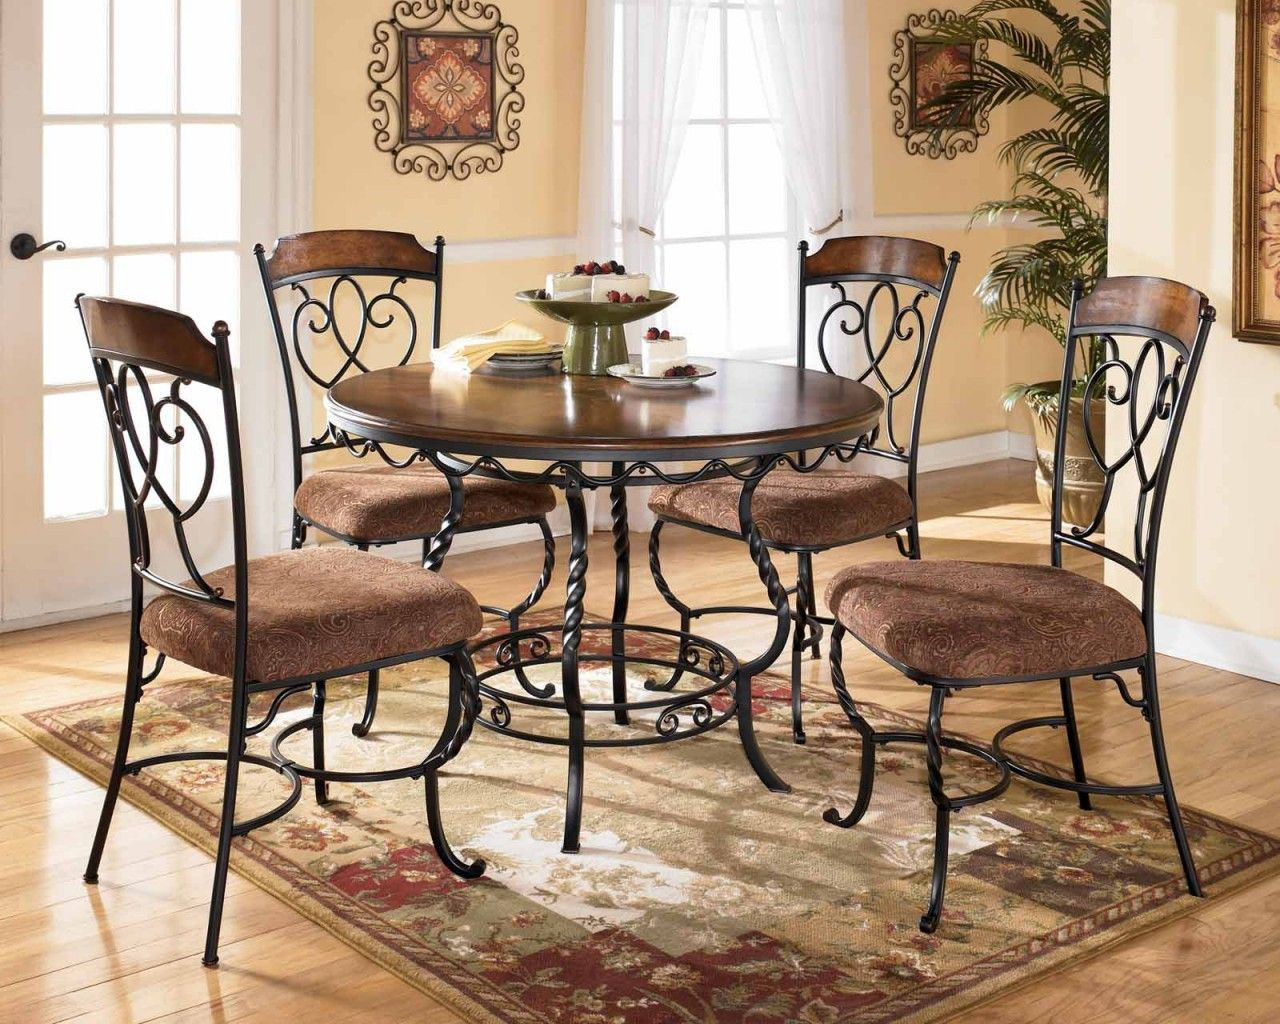 Small Round Kitchen Table Set
 kitchen tables and chairs sets